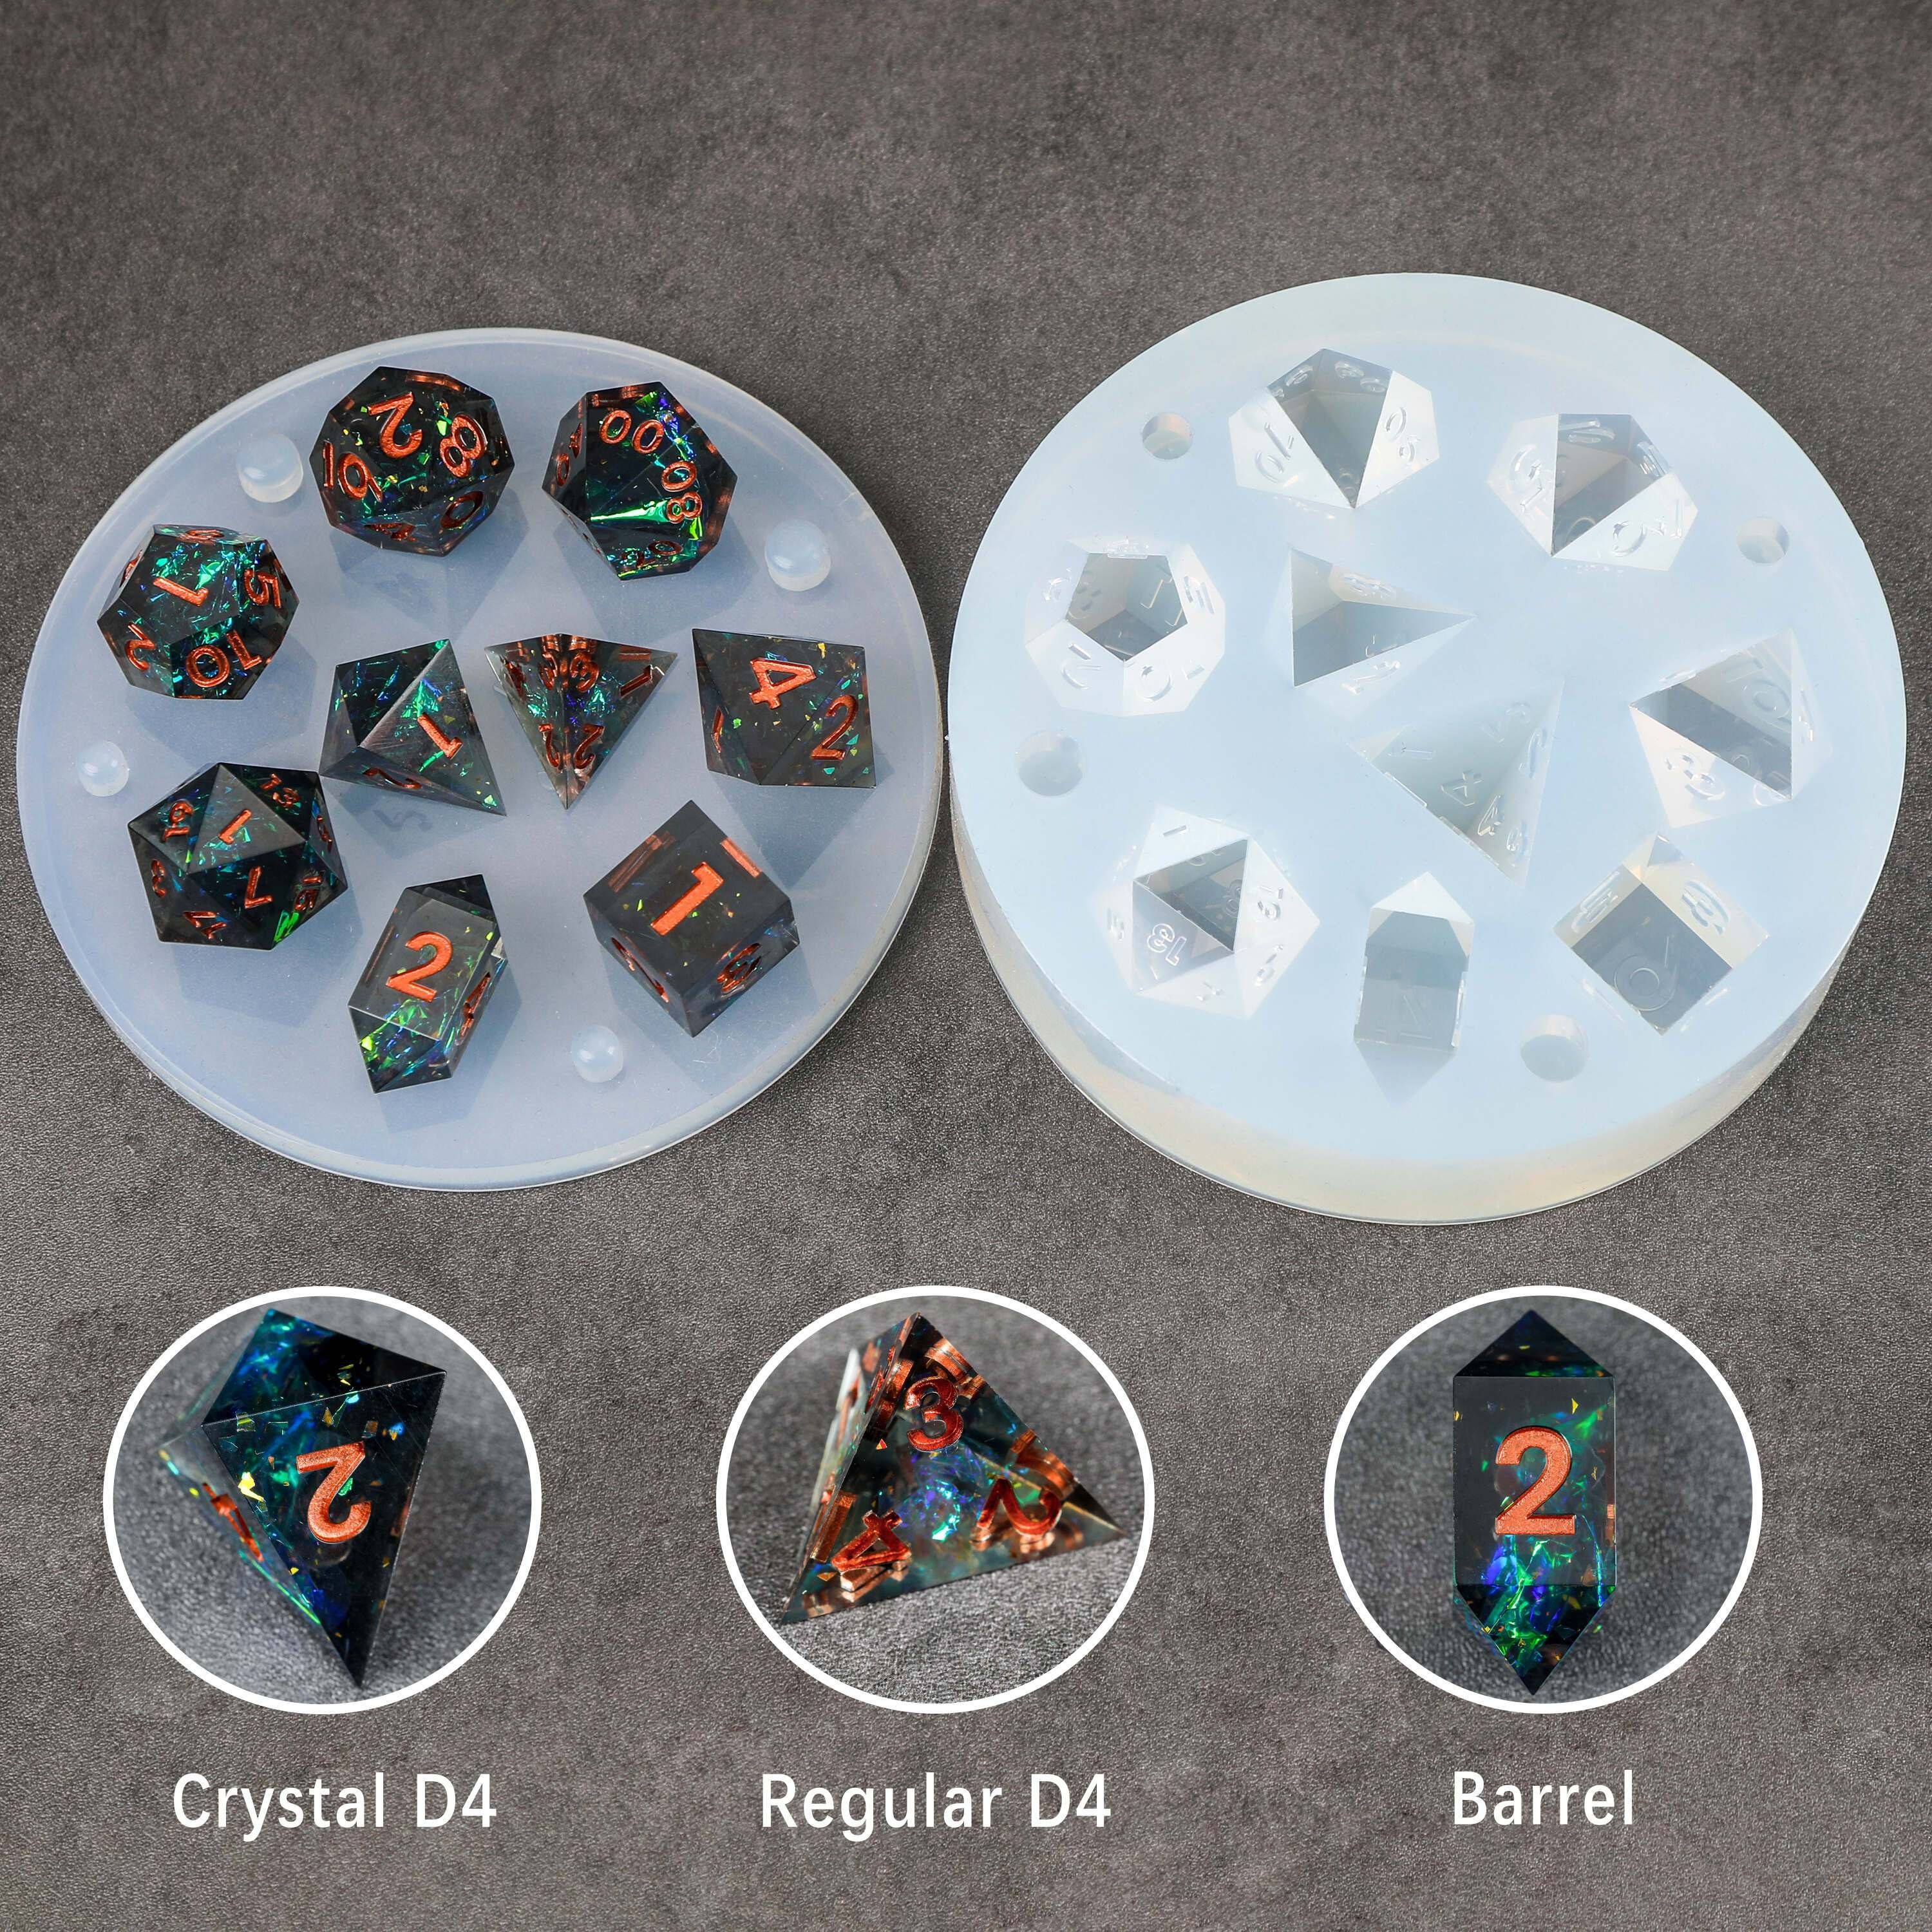 

9 Cavity Dice Silicone Mold Suitable For Professional Jewelry Dice Diy Players, Made Of Solid Silicone, For Candles, Resin, Uv Rubber Material Products